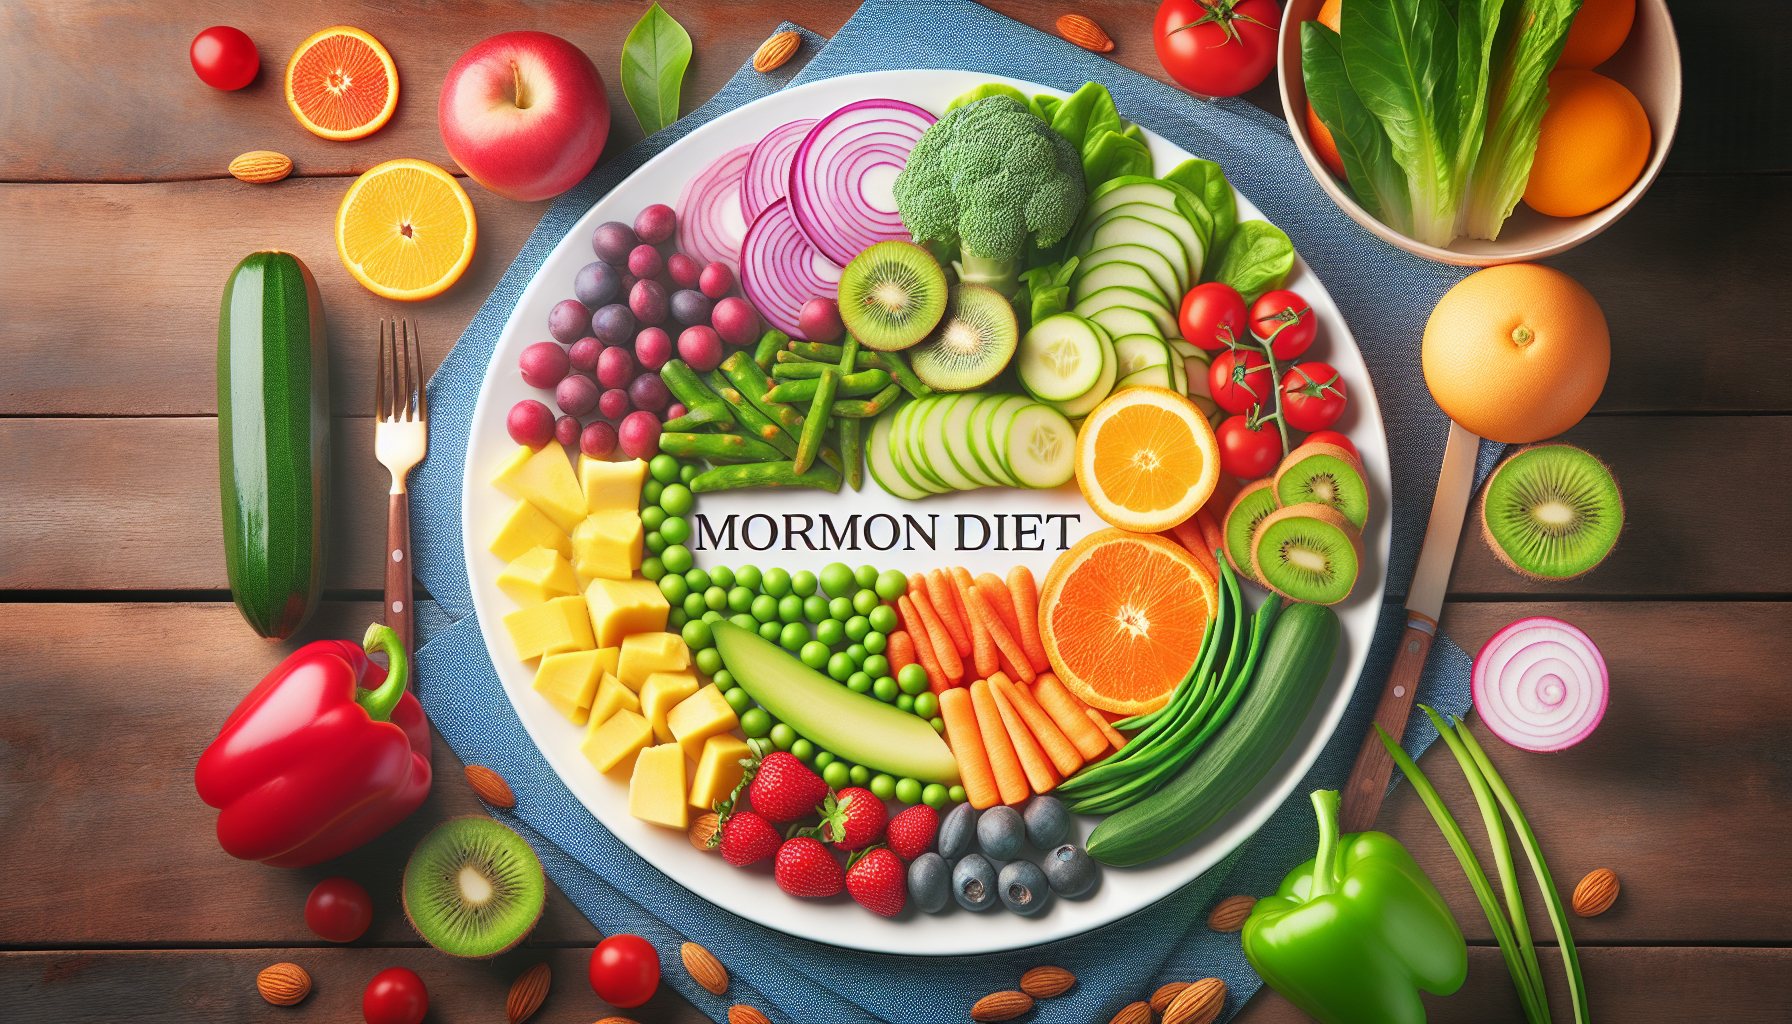 What Is The Strict Mormon Diet?